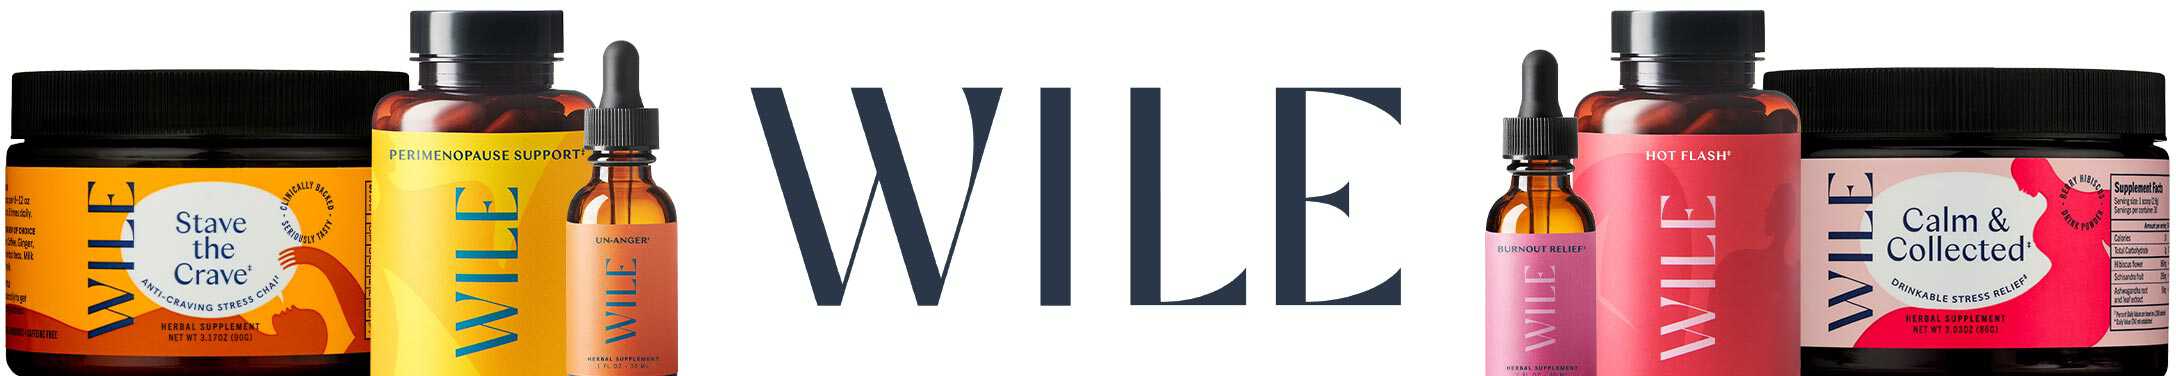 Wile logo next to product variety